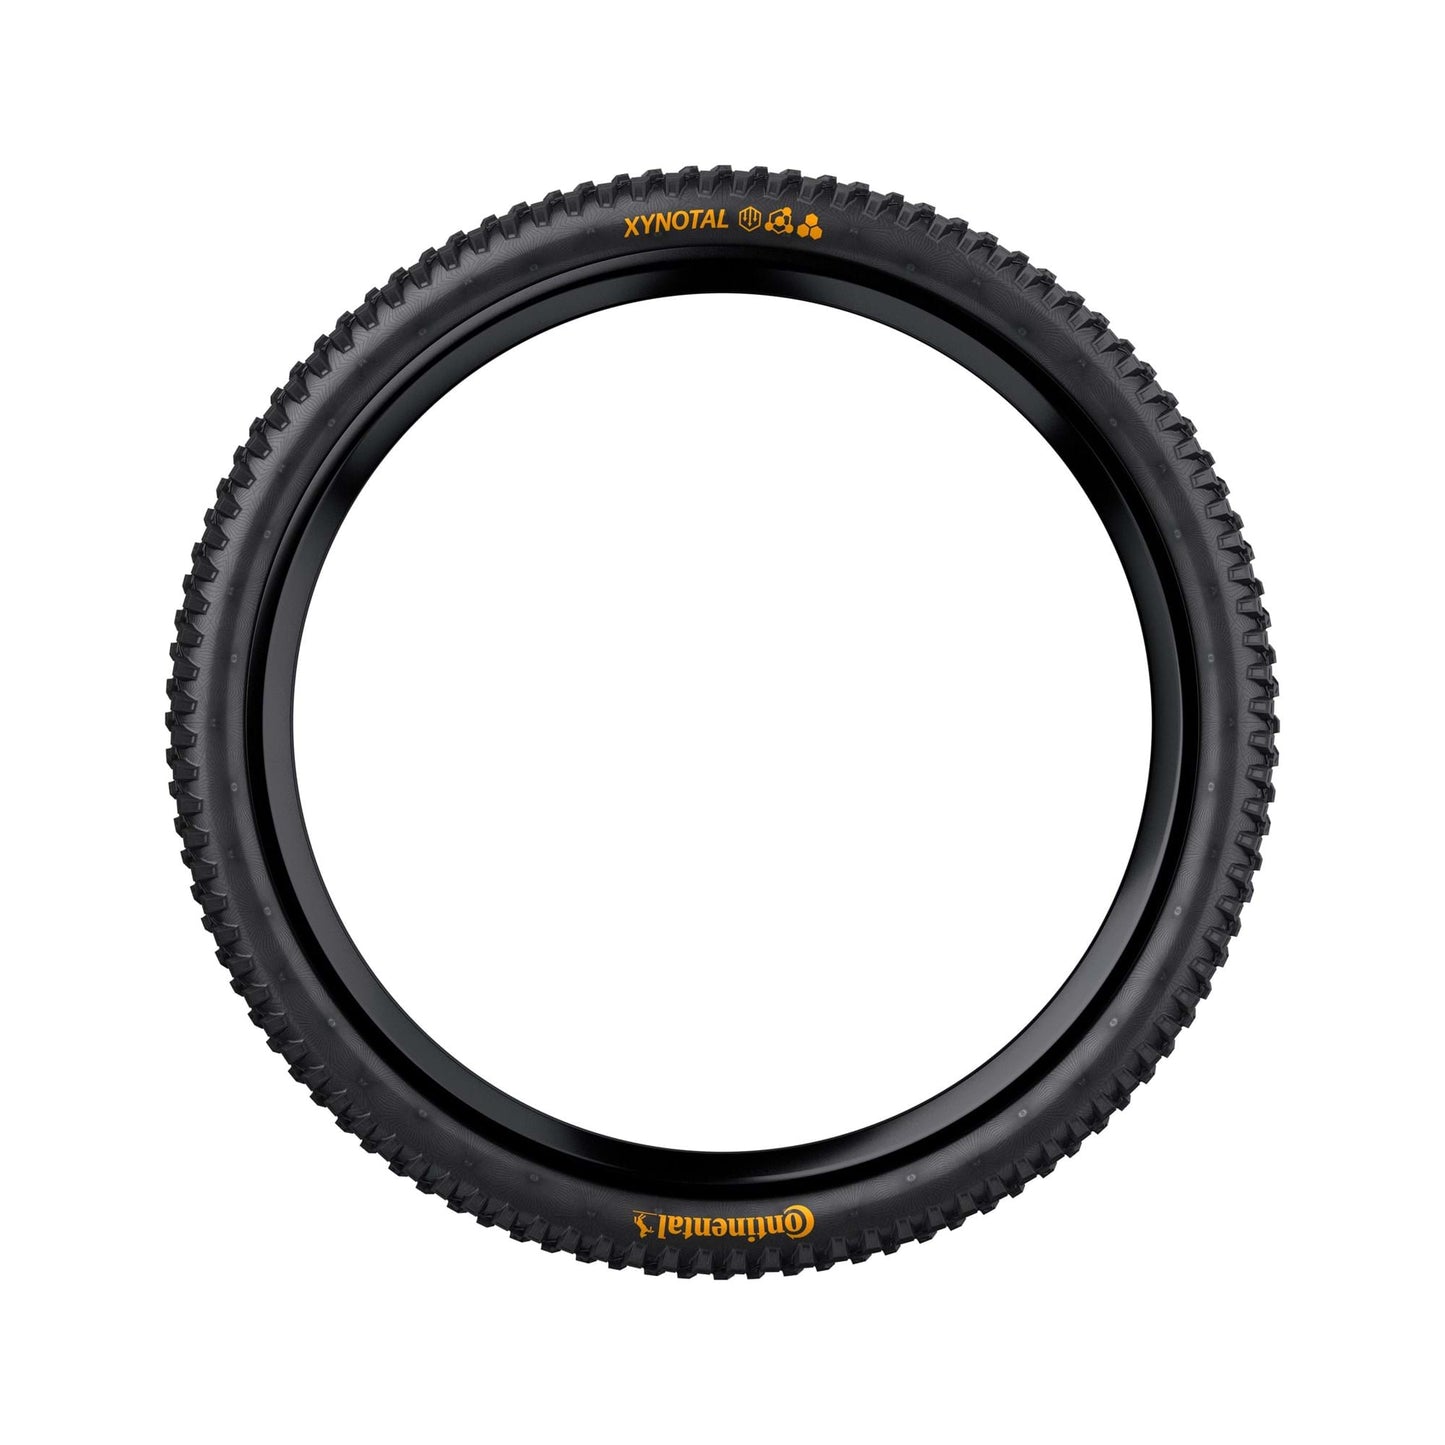 CONTINENTAL XYNOTAL DOWNHILL TYRE - SOFT COMPOUND FOLDABLE - 29X2.40"